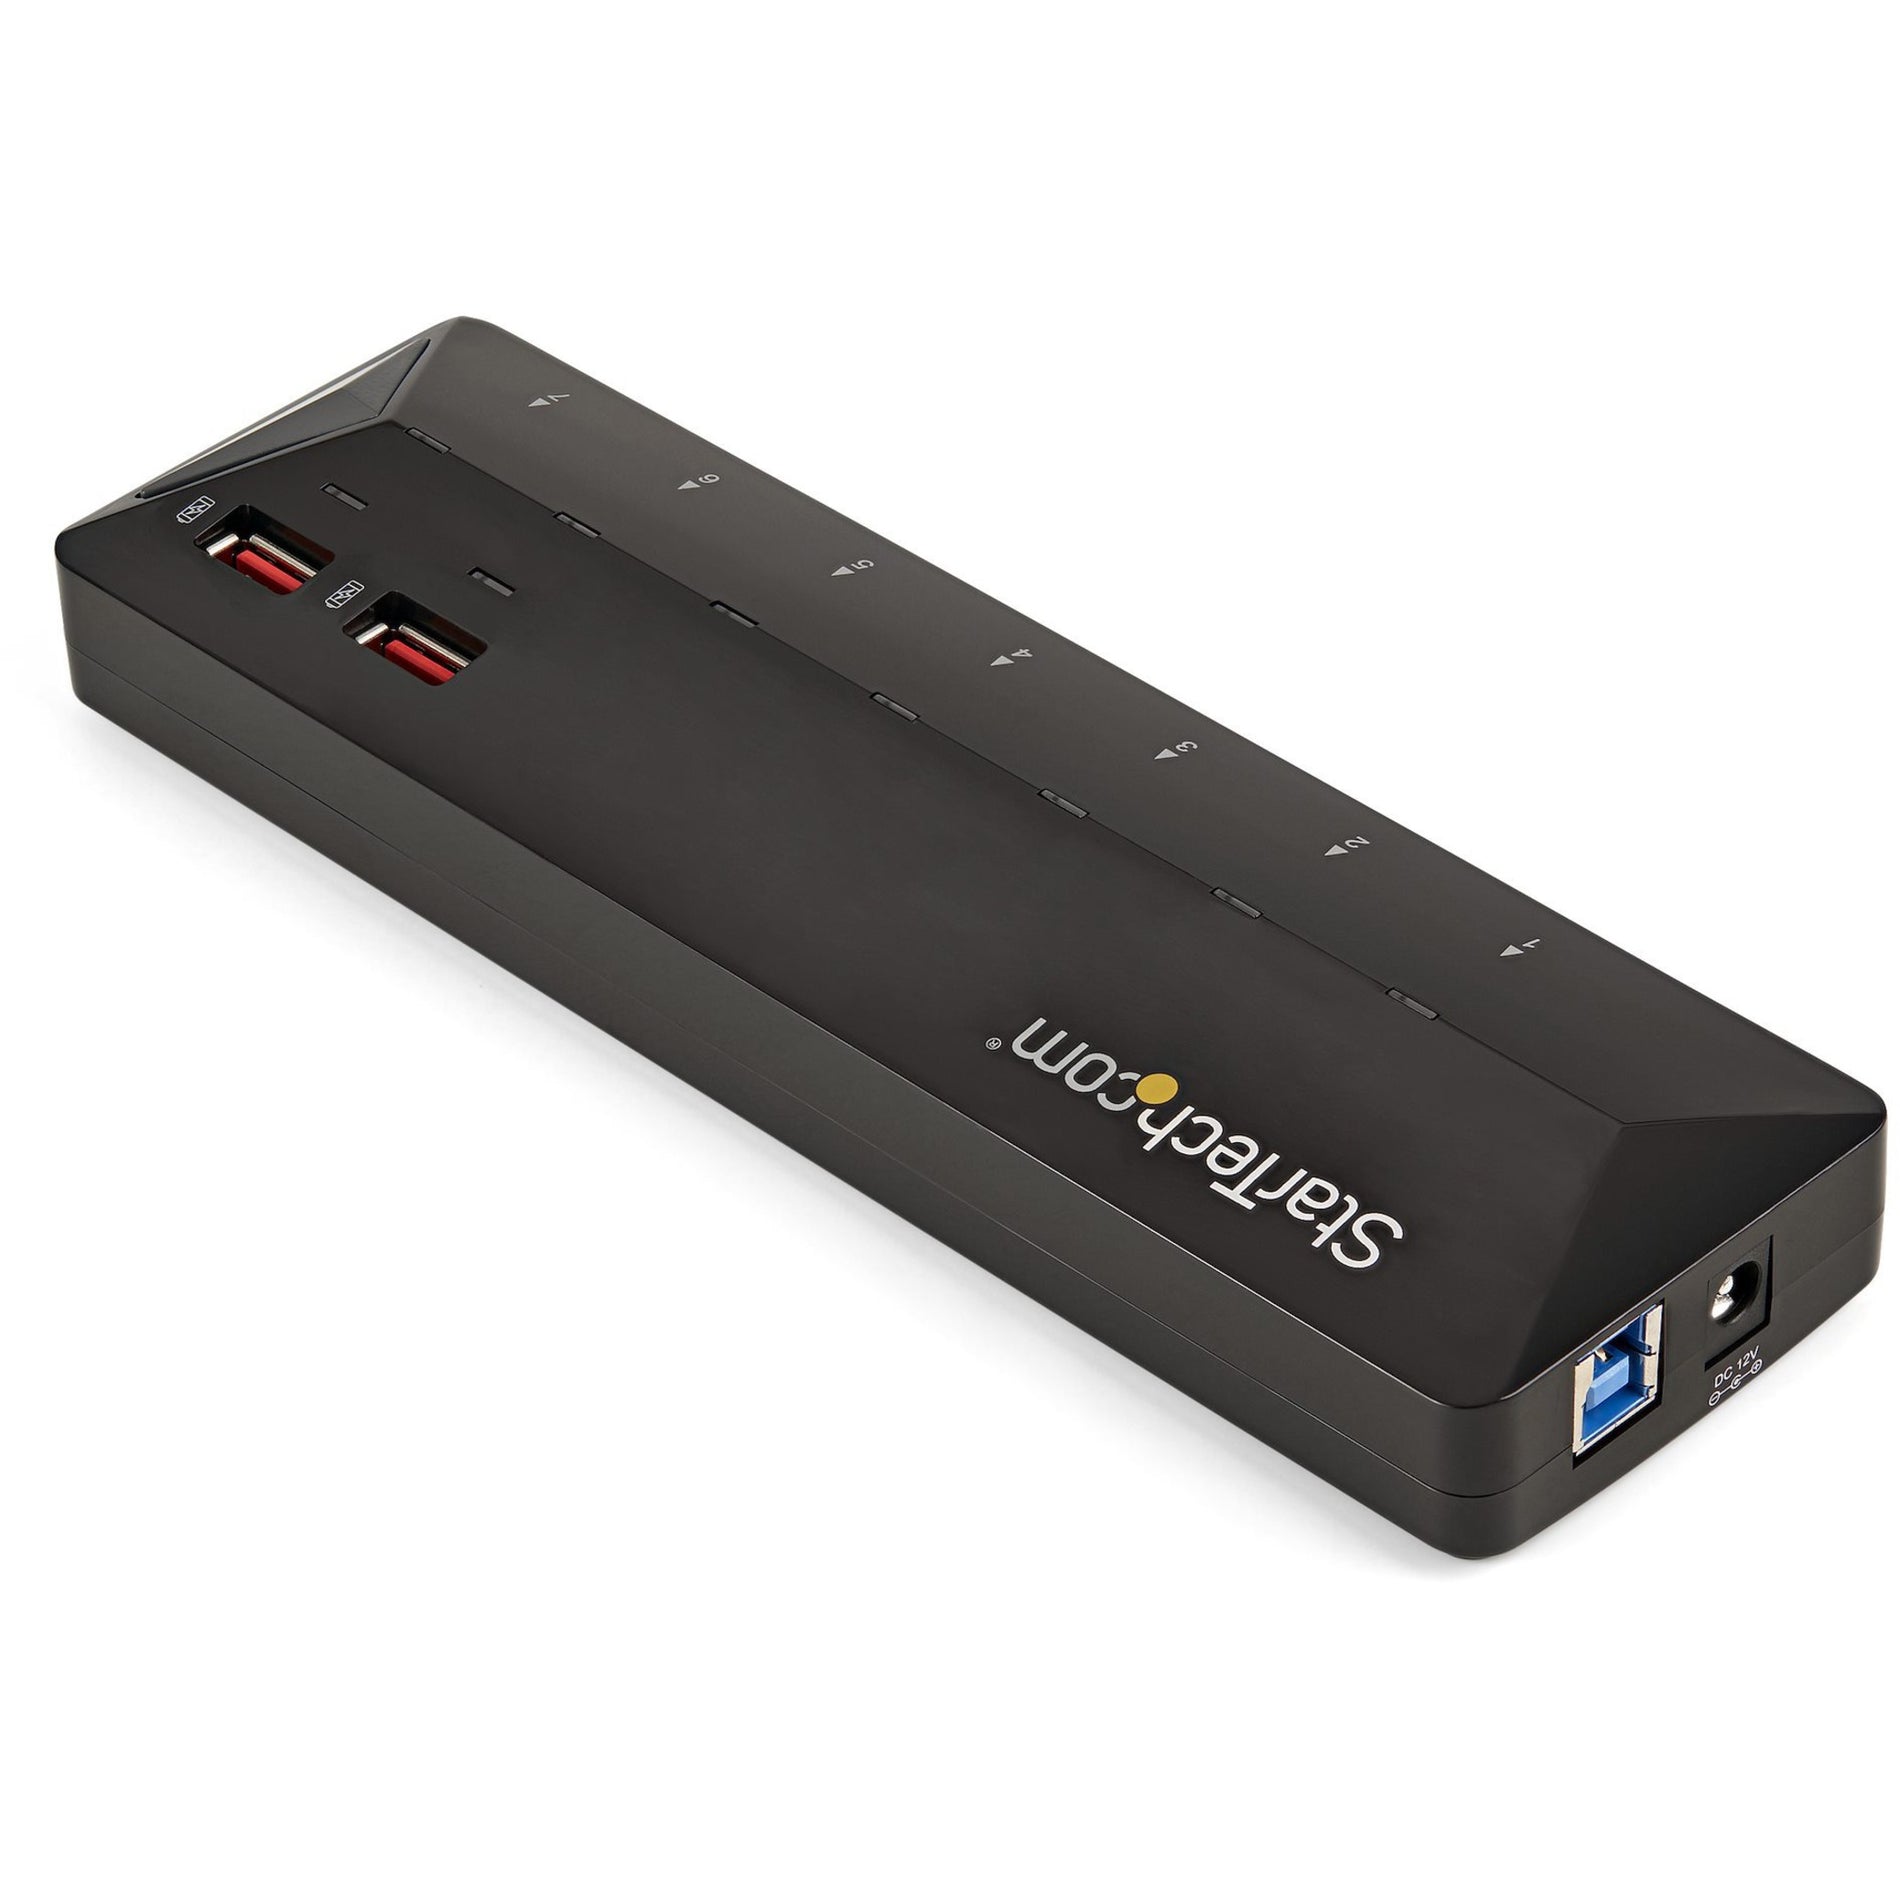 StarTech.com ST93007U2C 7-Port USB 3.0 Hub plus Dedicated Charging Ports, Fast-Charging Station for Desktop - Expand USB Connectivity and Charge Devices